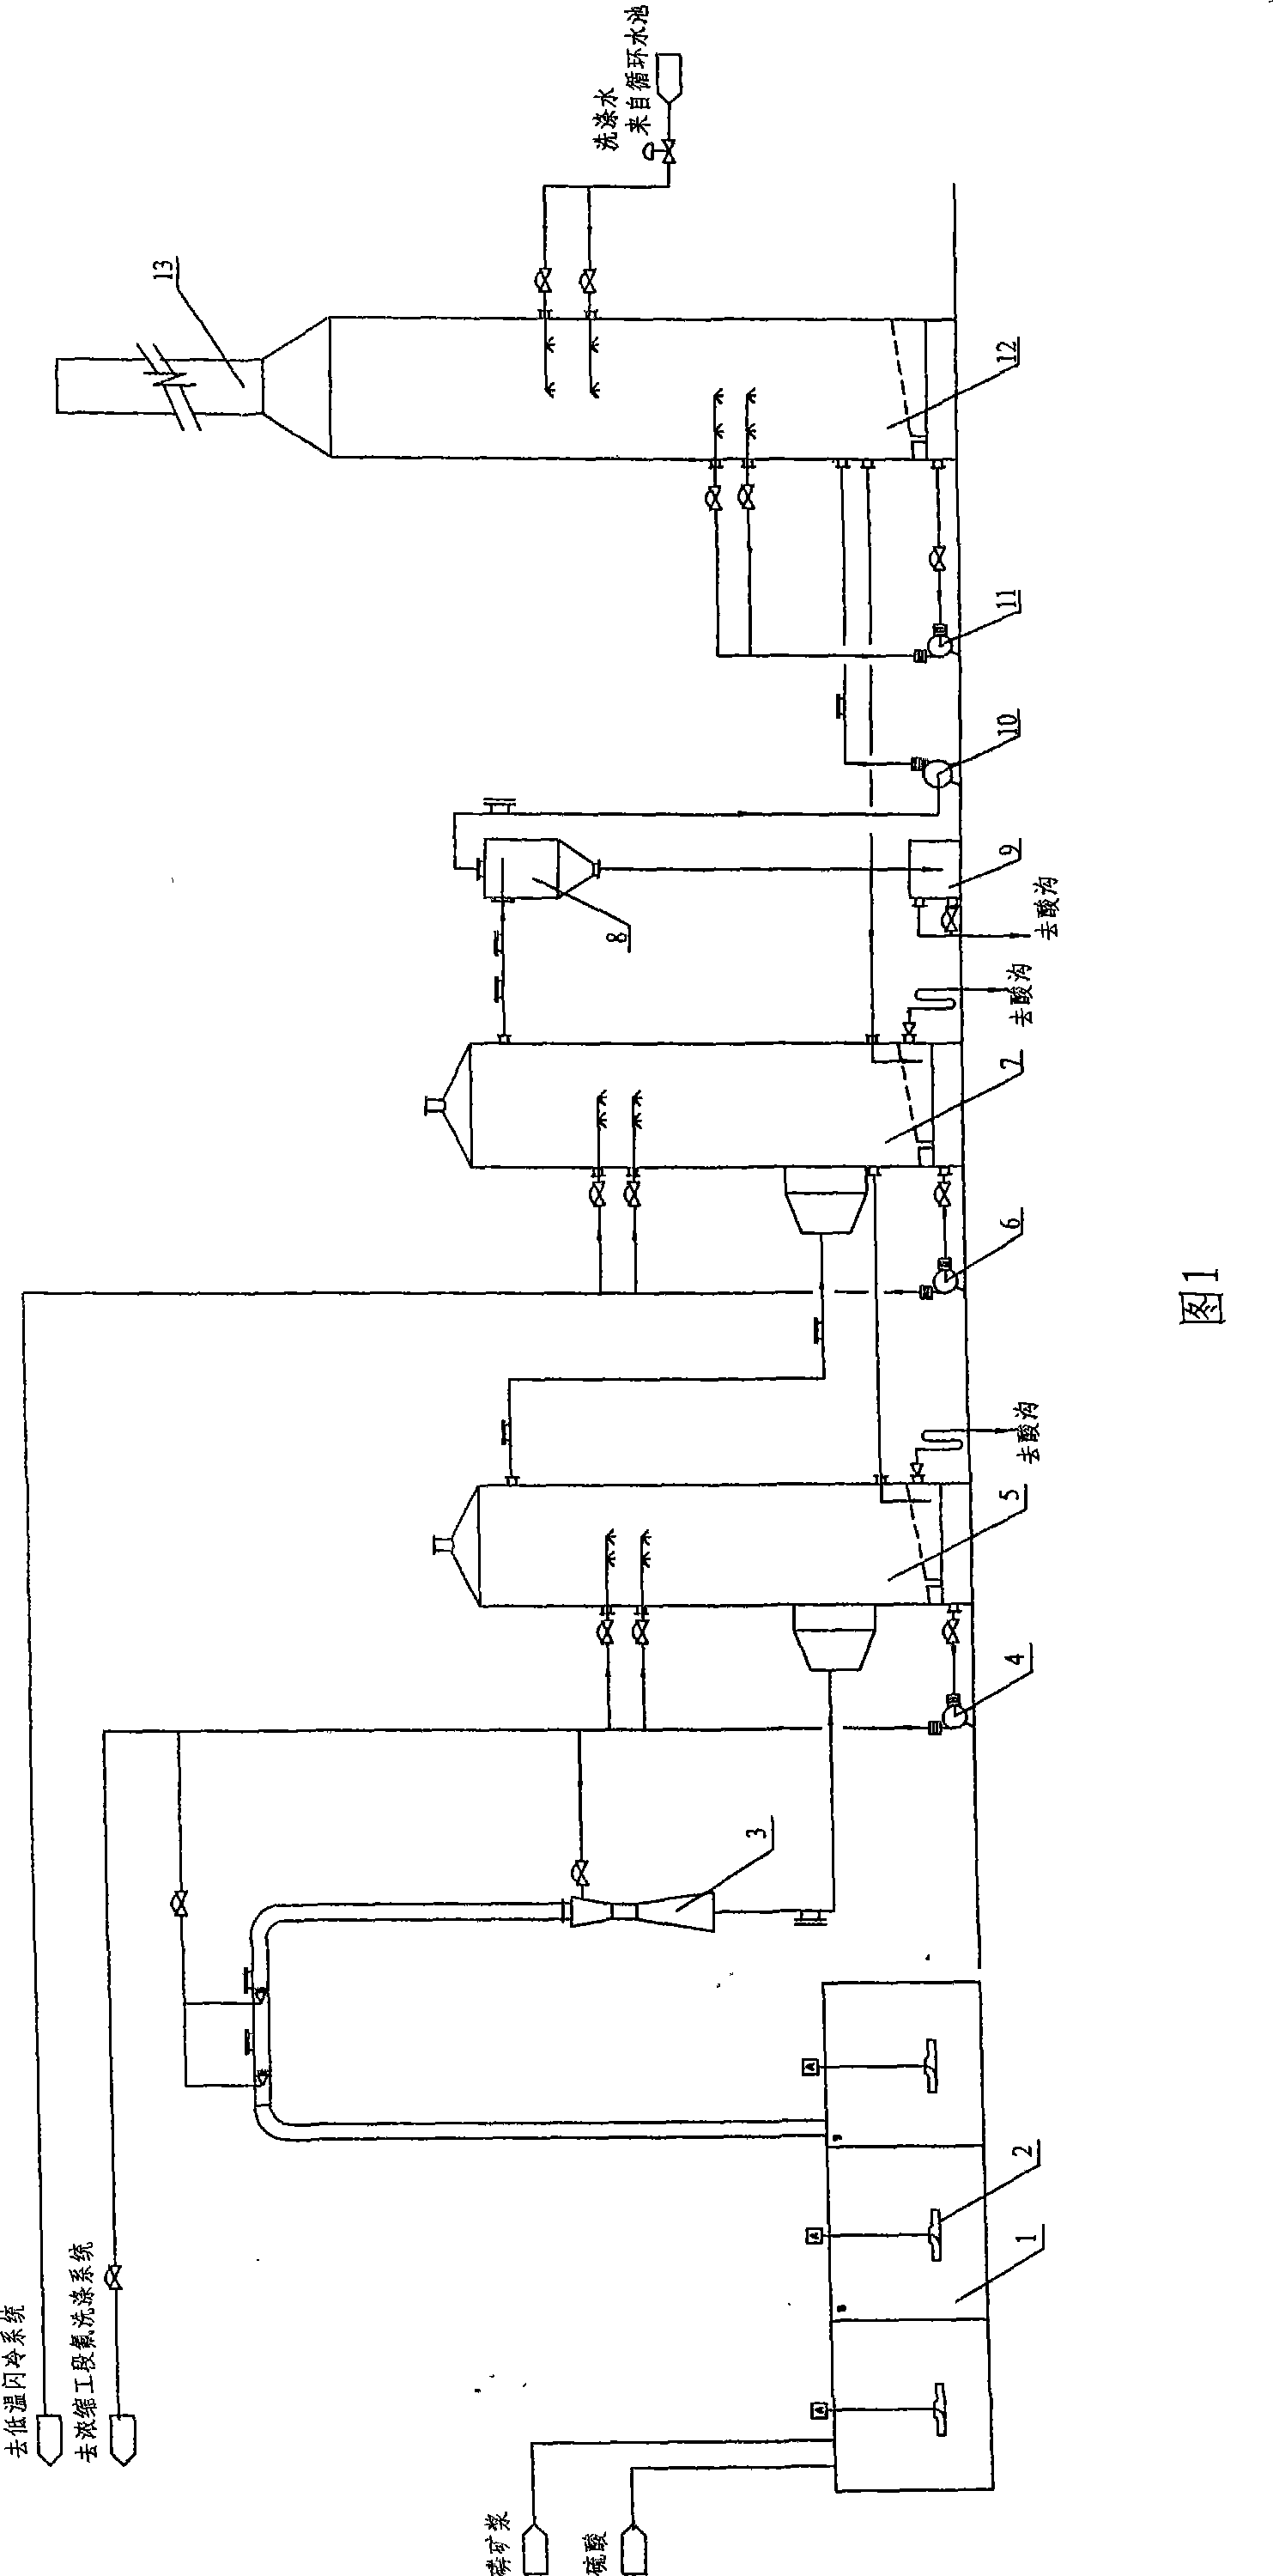 Method for improving washing efficiency for tail gas from wet-process phosphoric acid manufacture